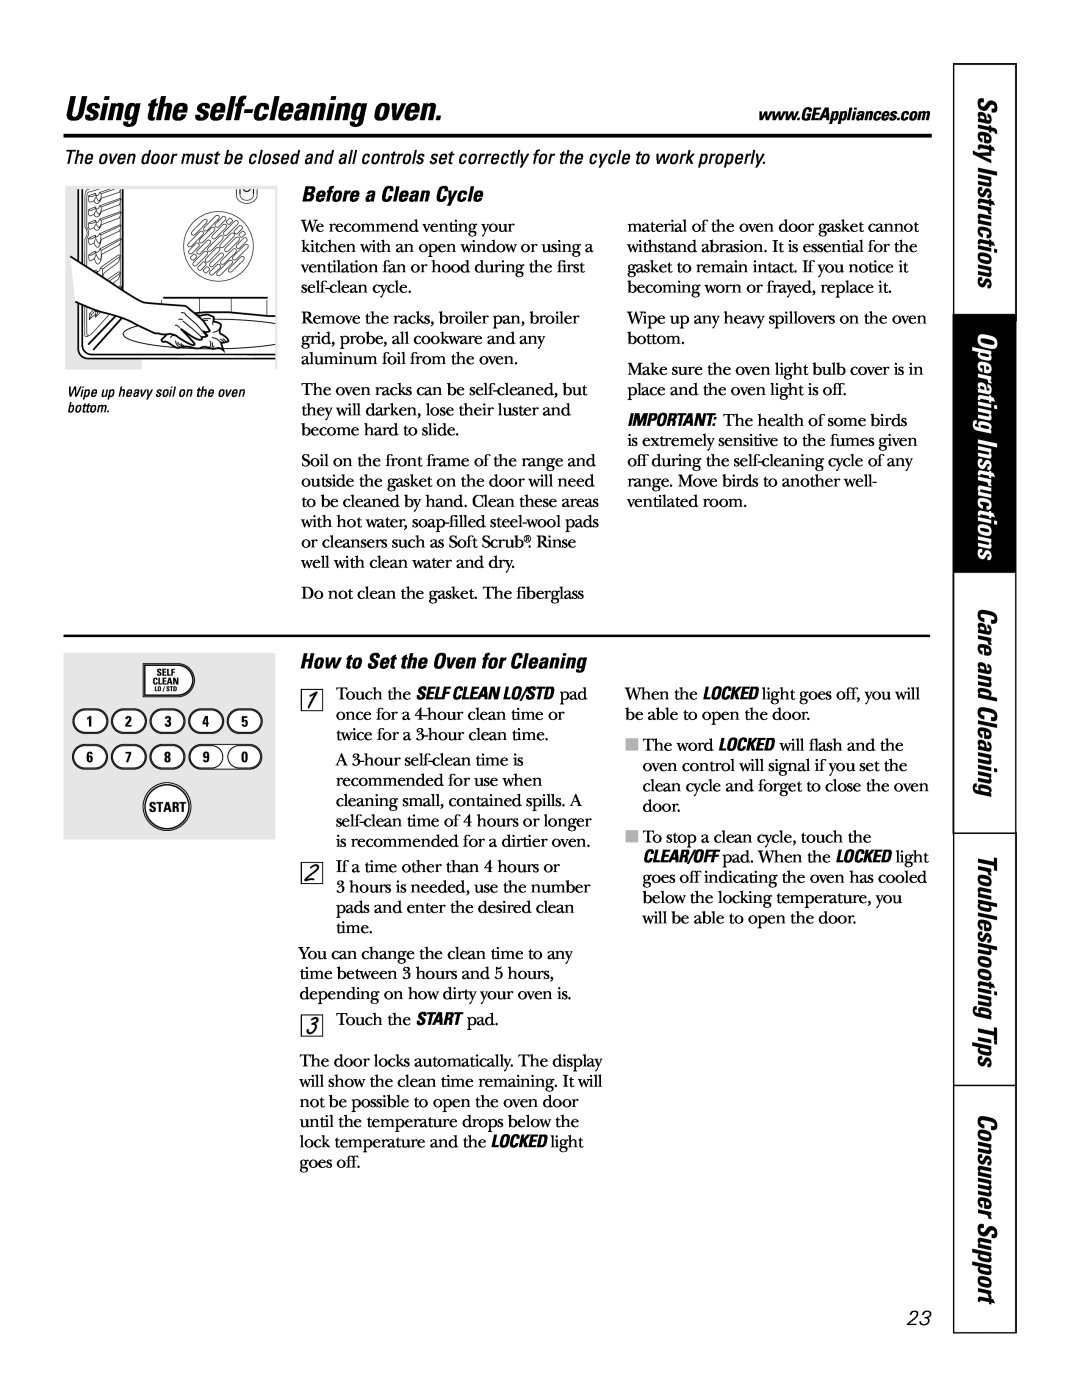 GE JSP57 owner manual Using the self-cleaningoven, Instructions Operating Instructions Care, Before a Clean Cycle, Safety 